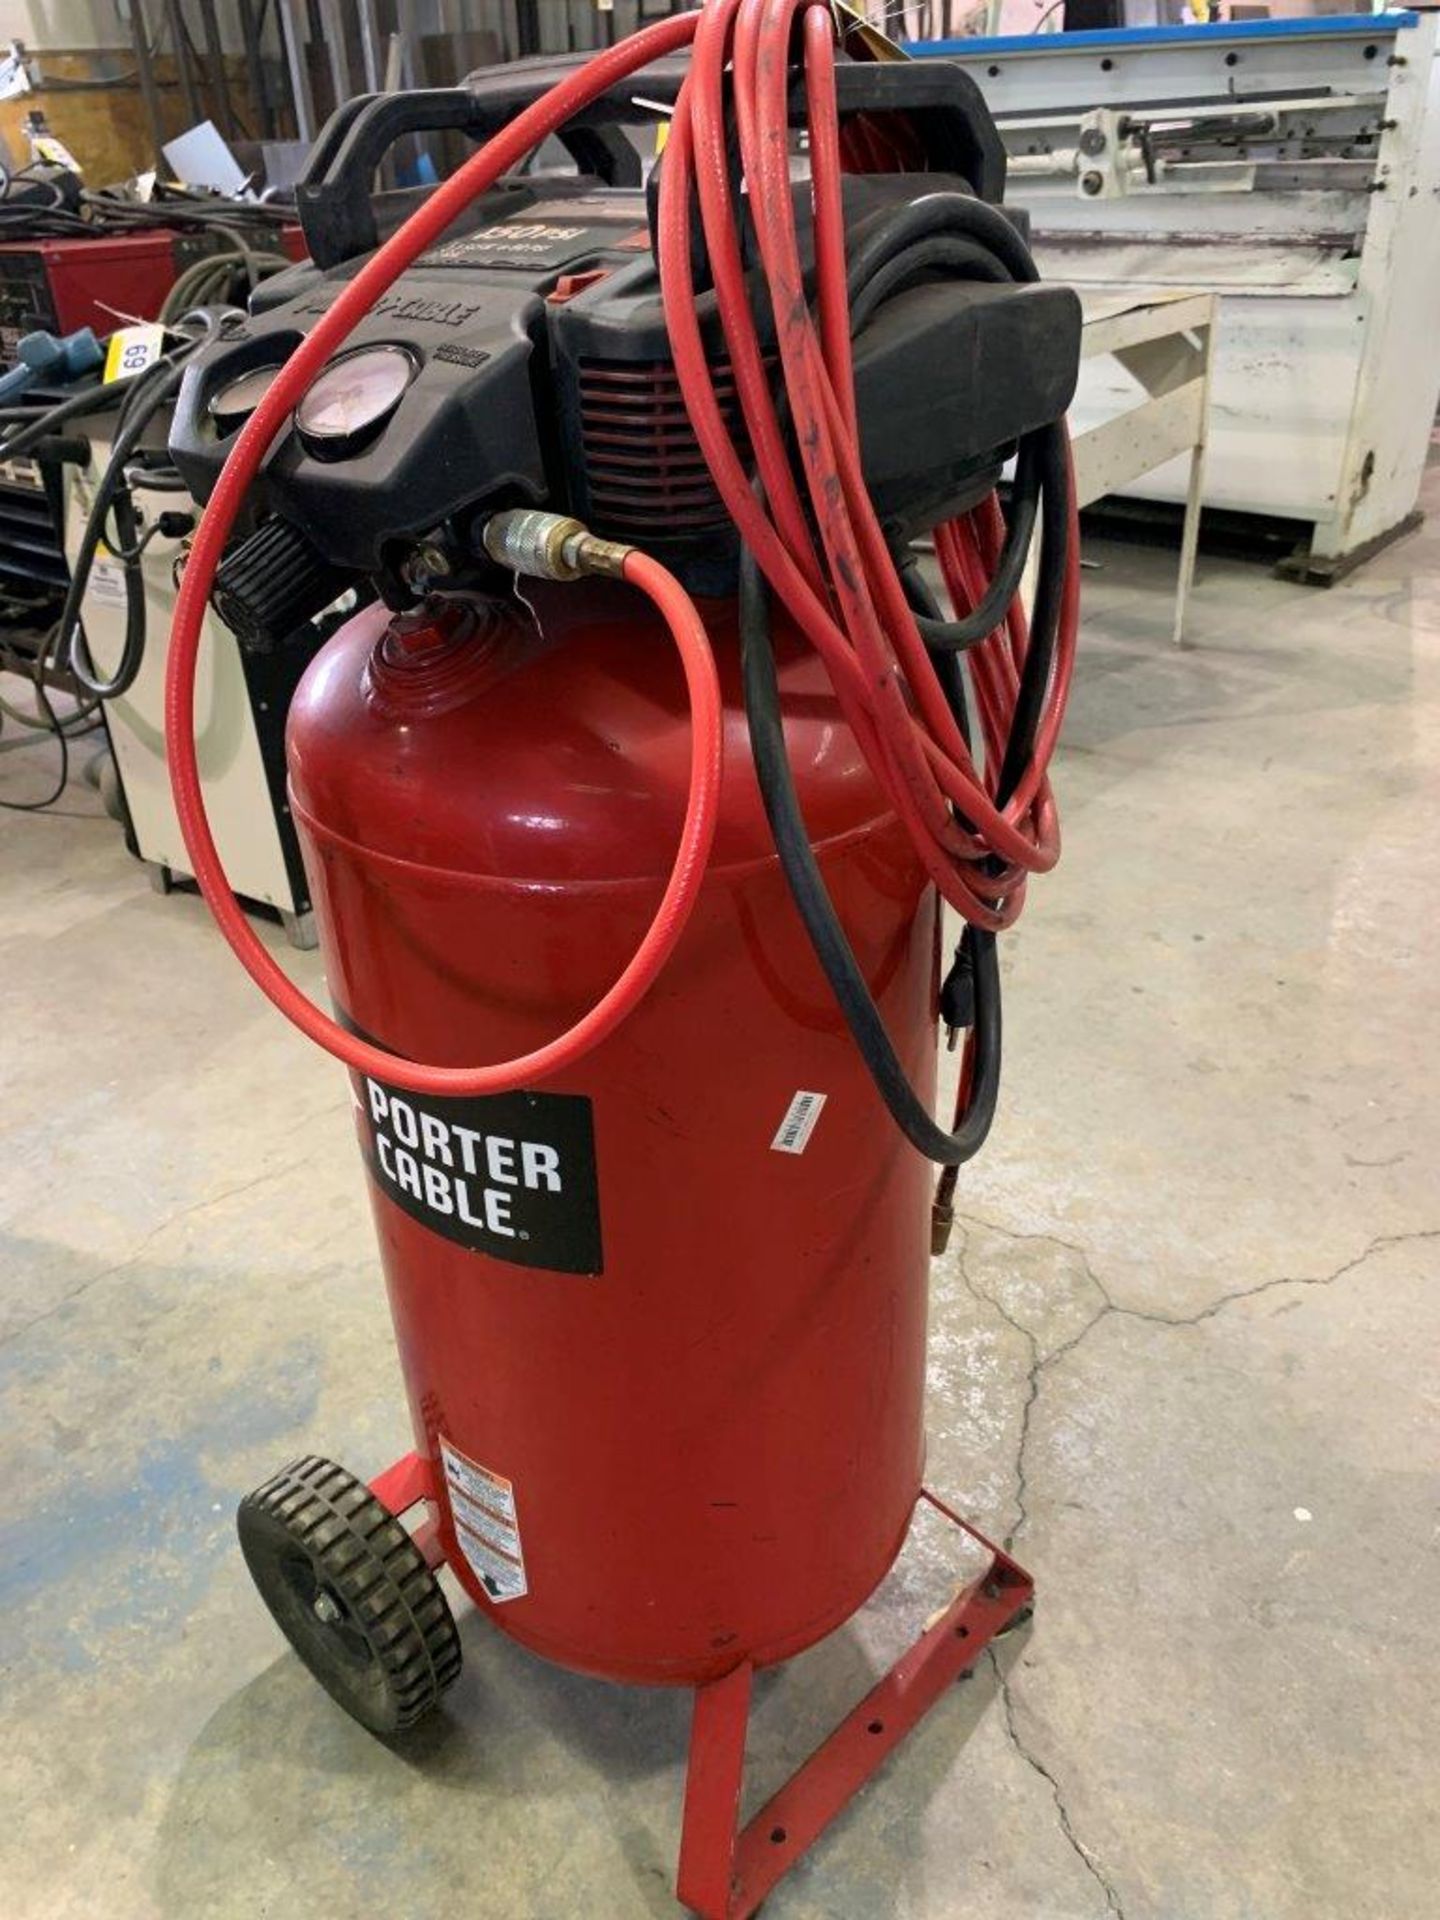 PORTER CABLE 150 PSI 17 GAL. PORTABLE AIR COMPRESSOR W/ WHEEL KIT